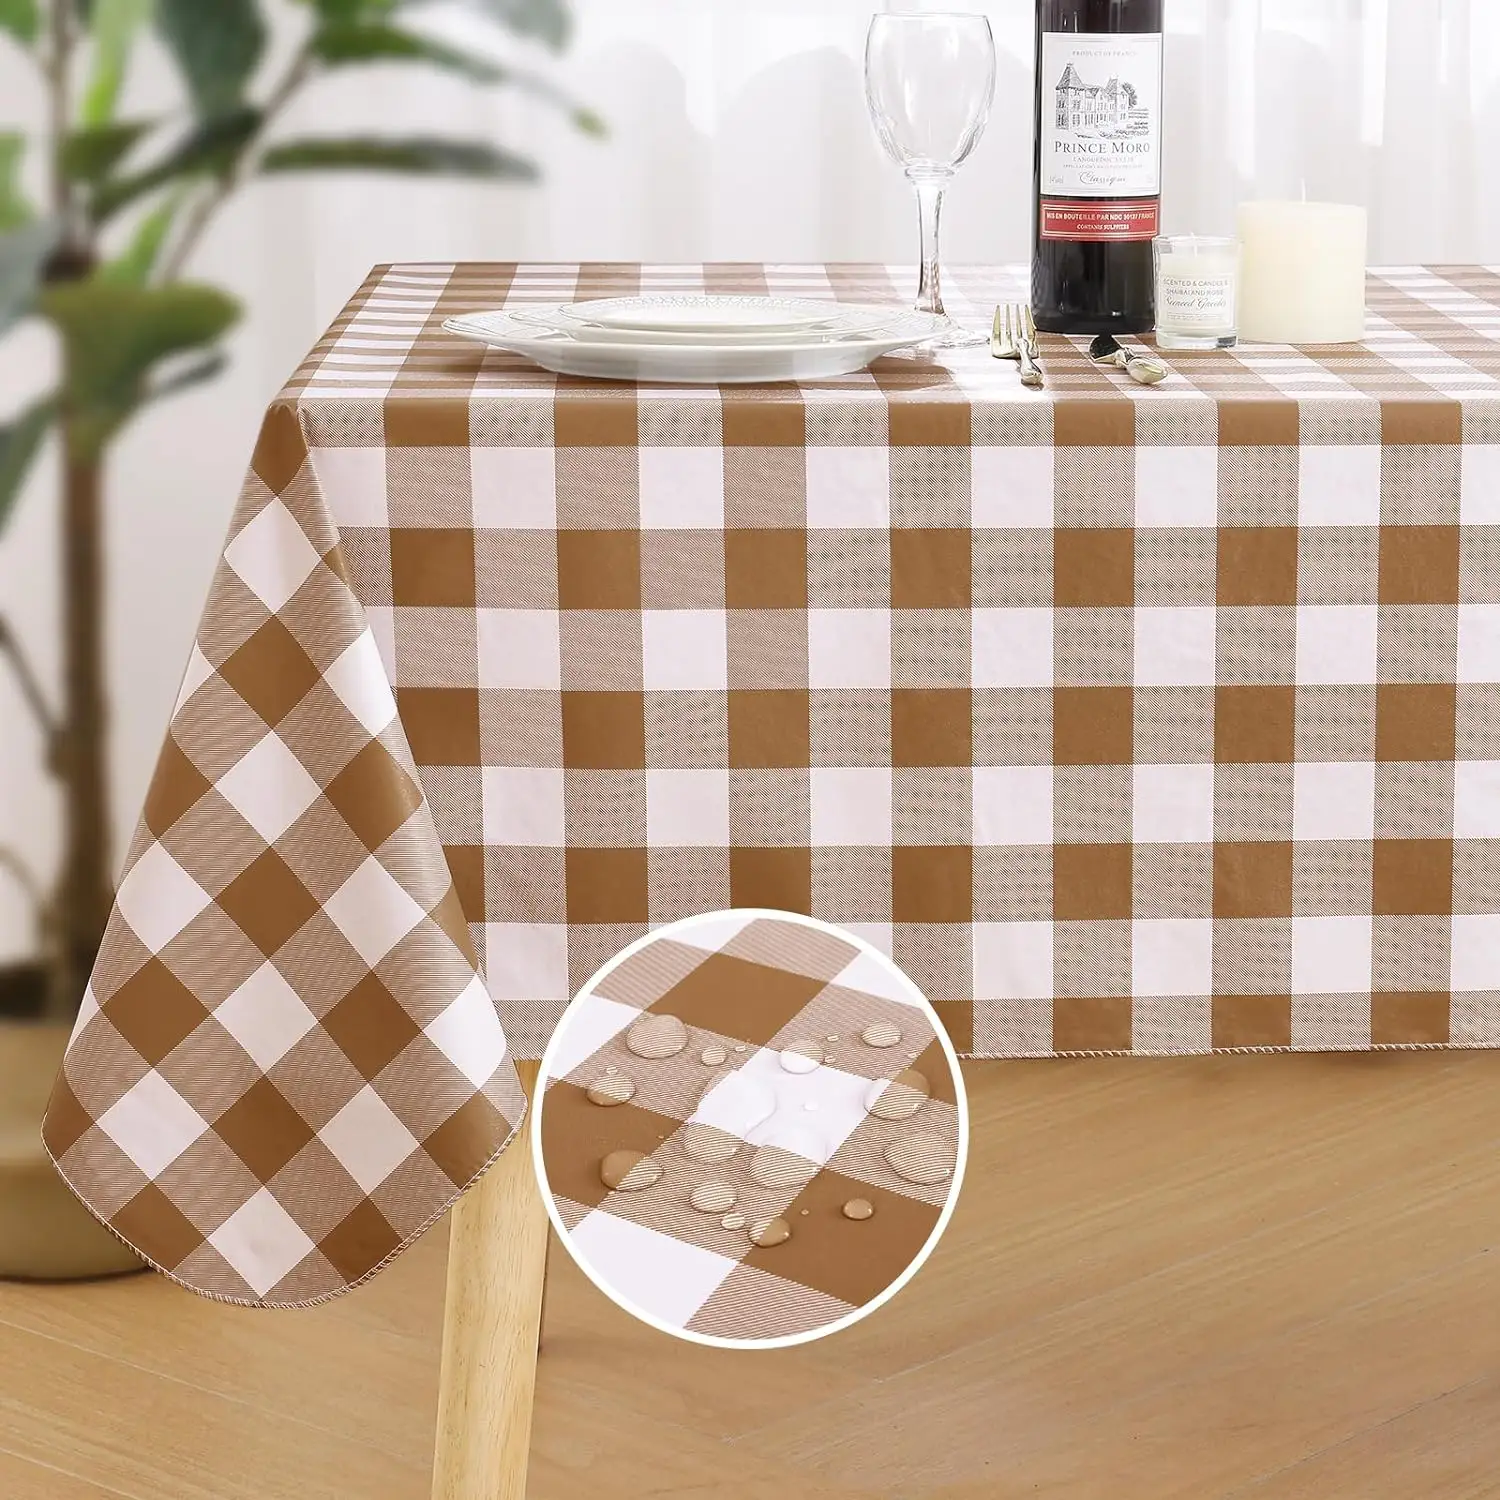 Popular recommended party activity tablecloth pattern custom pvc tablecloth back sticker flannel birthday wedding tablecloth